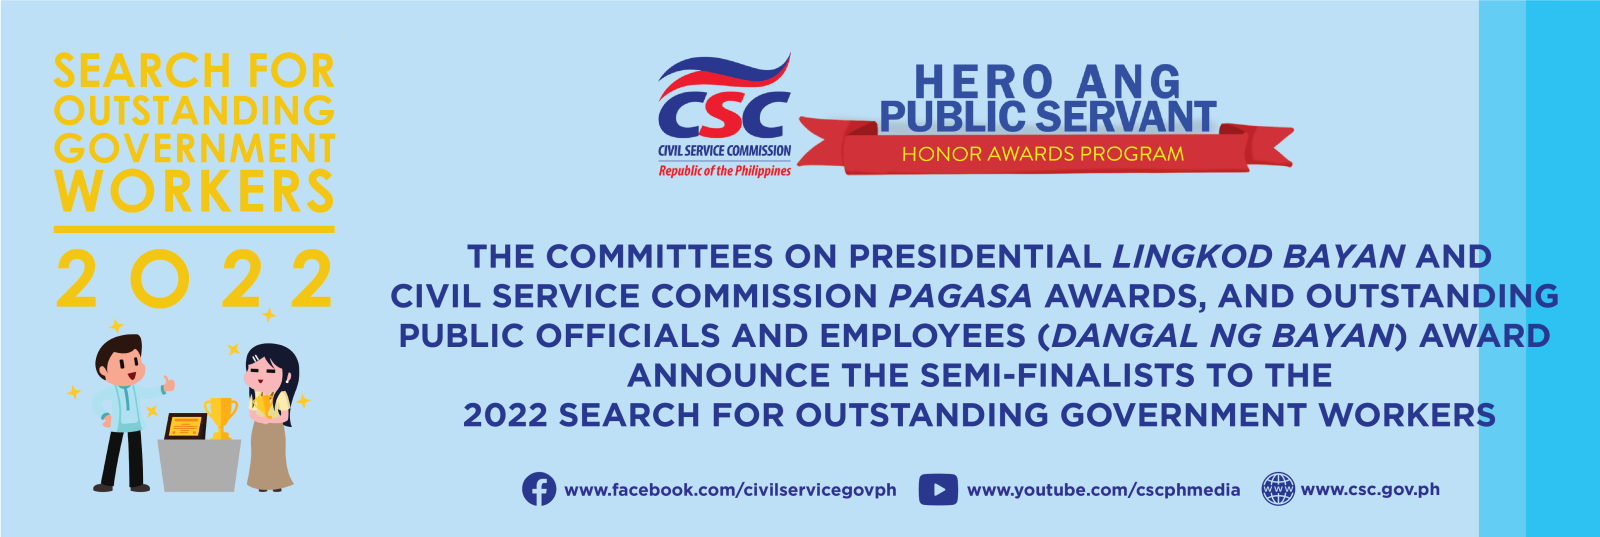 Semi-finalists to the 2022 Search for Outstanding Government Workers